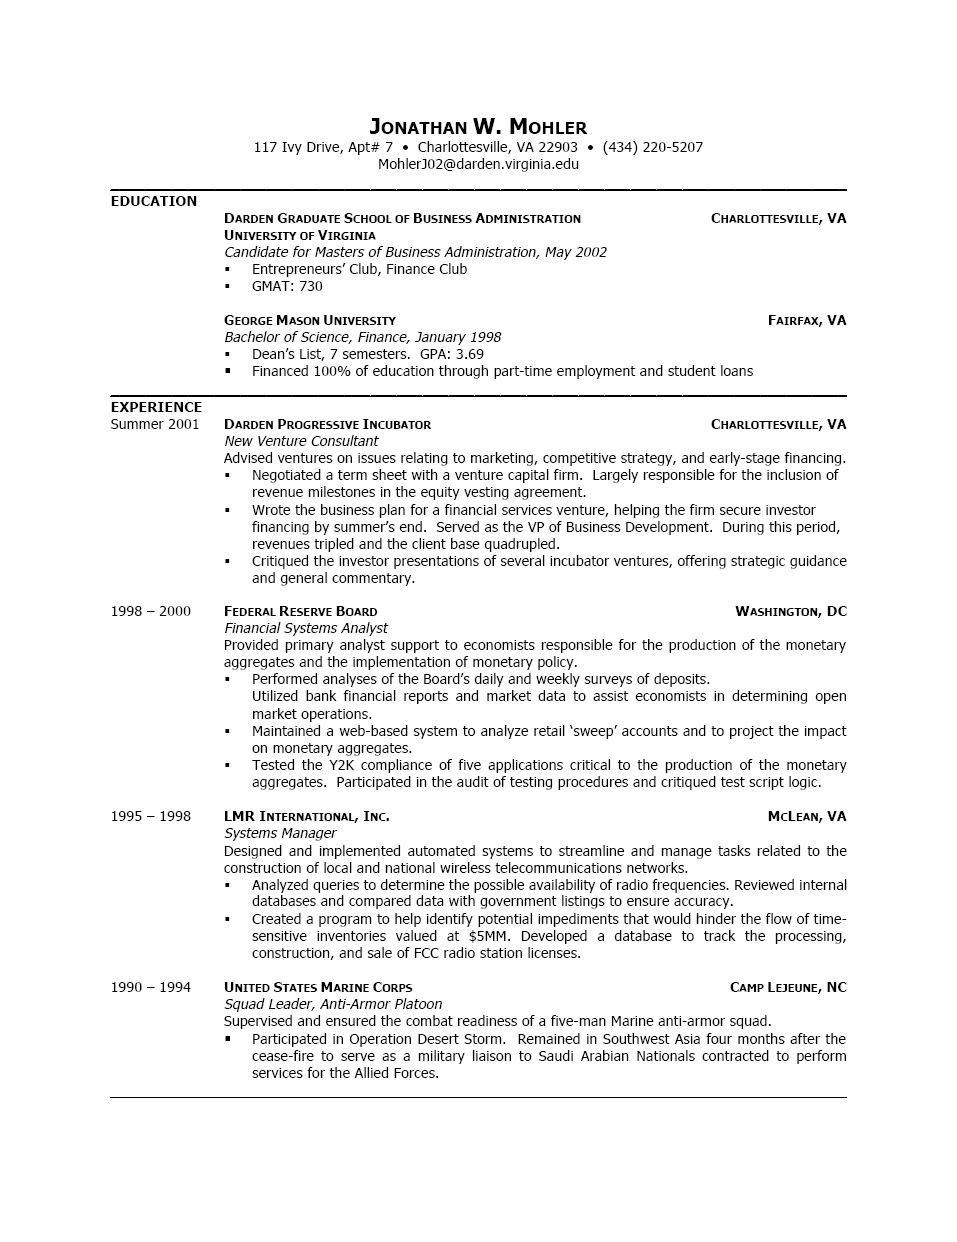 example resume for high school students for college applications 